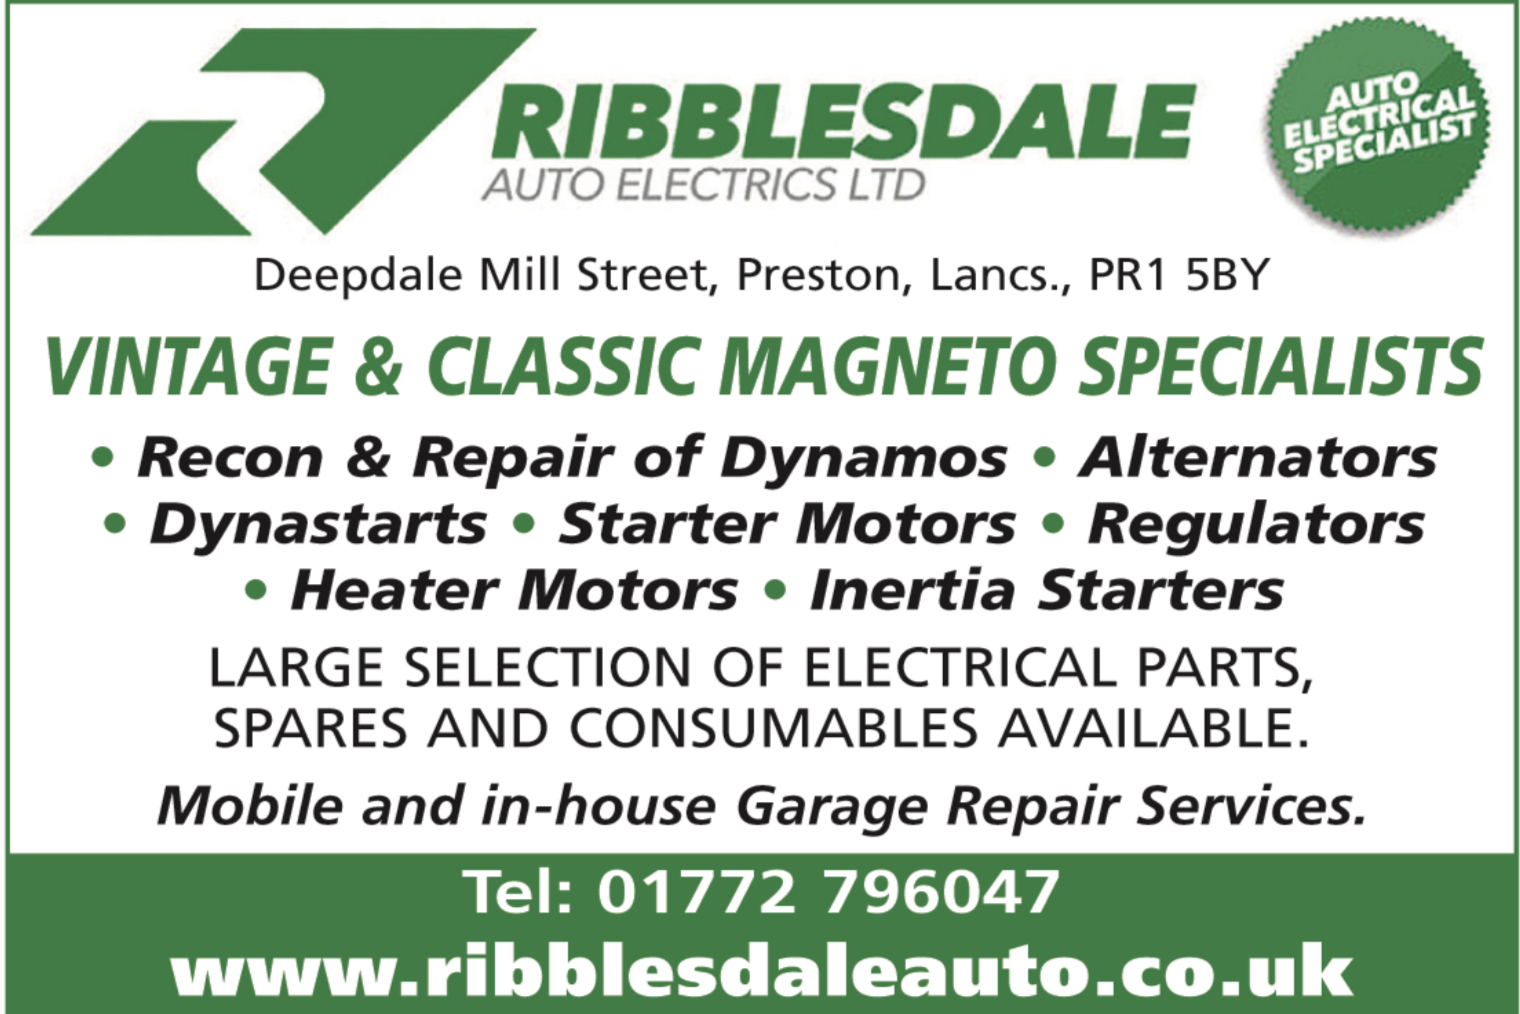 Ribblesdale Auto Electrics - Vintage & classic Magneto Specialists, recon and repair dynamos, alternators, heaters, starter motors,